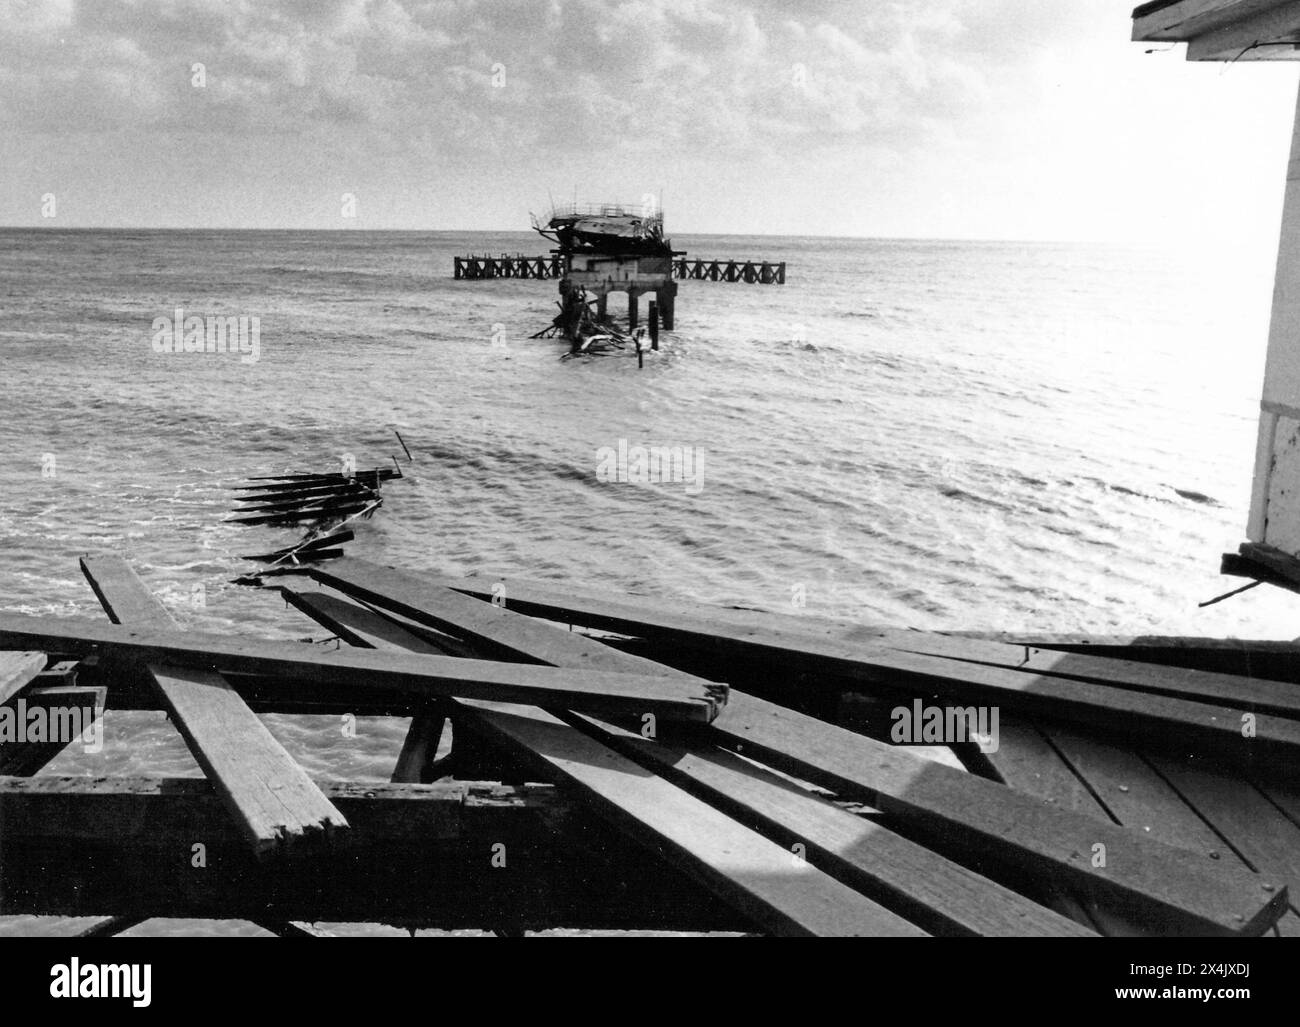 SHANKLIN PIER , ISLE OF WIGHT, DESTROYED IN THE GREAT STORM 0F 1987. PIC MIKE WQALKER, 1987 Stock Photo